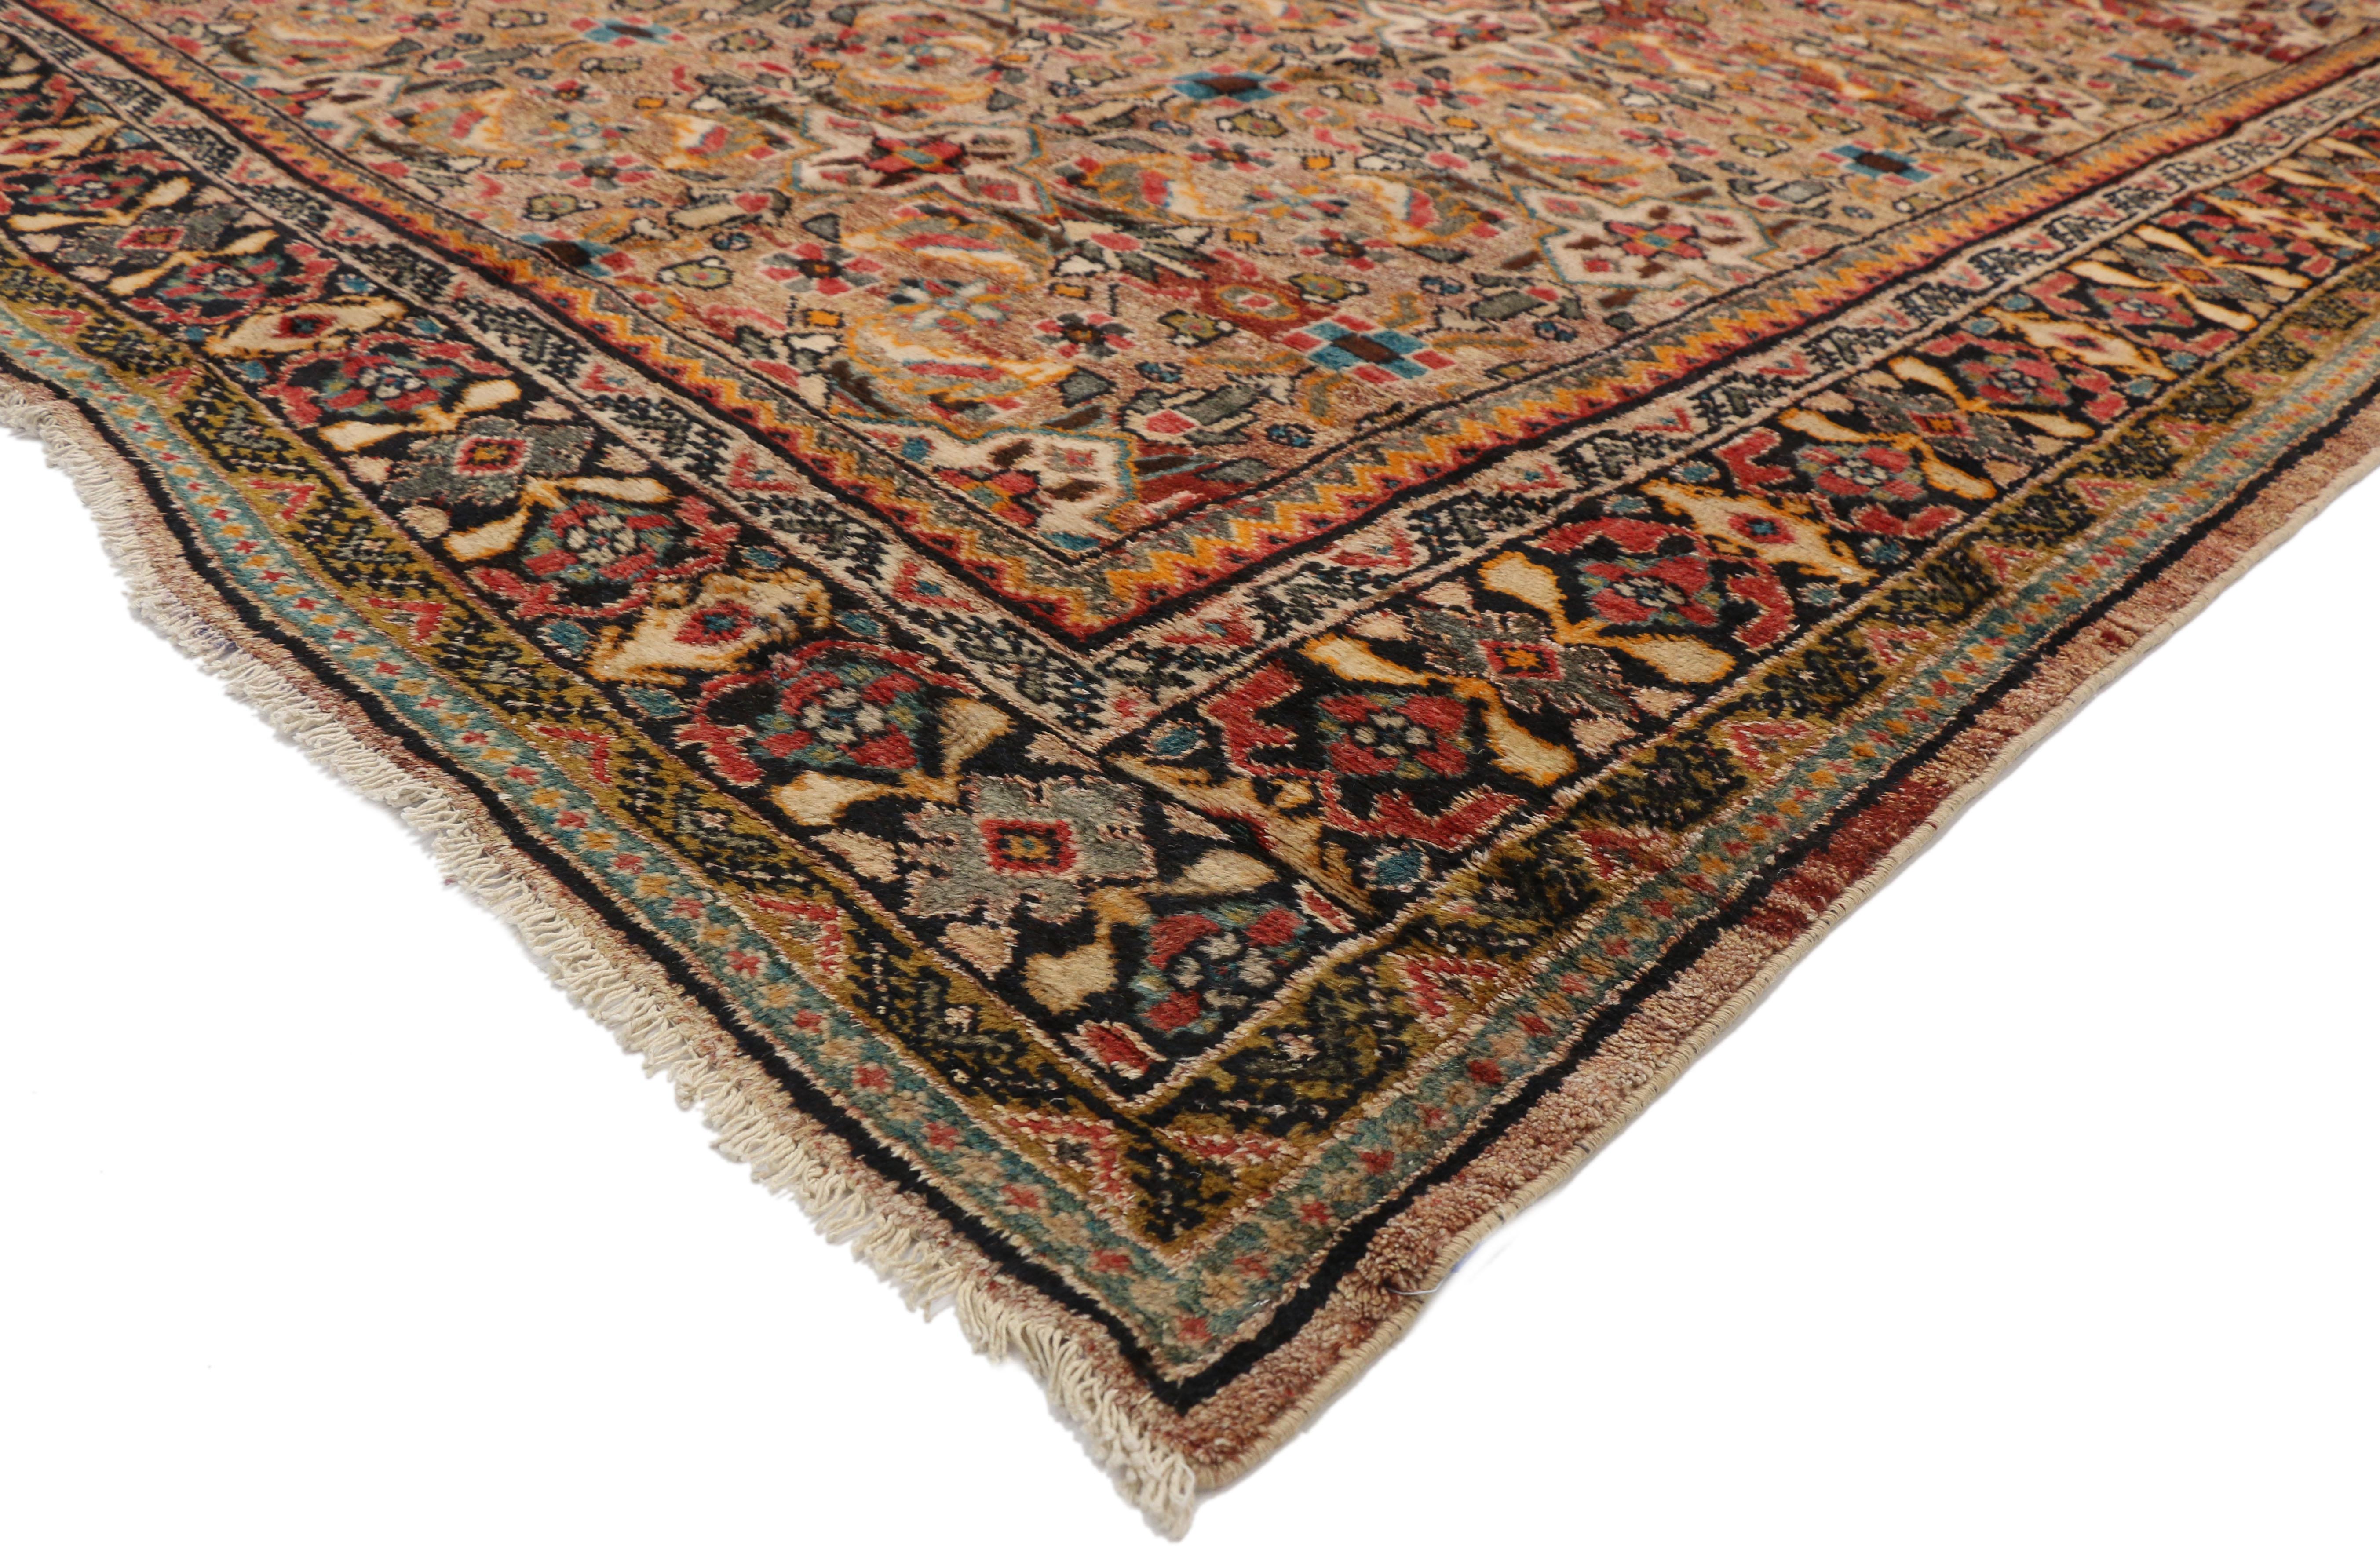 76355 Vintage Persian Mahal Area Rug with Eclectic Modern Northwestern Style 09'03 x 12'07. This hand knotted wool vintage Persian Mahal rug features a lively all-over geometric floral lattice pattern composed of the Mina Khani pattern. The inner